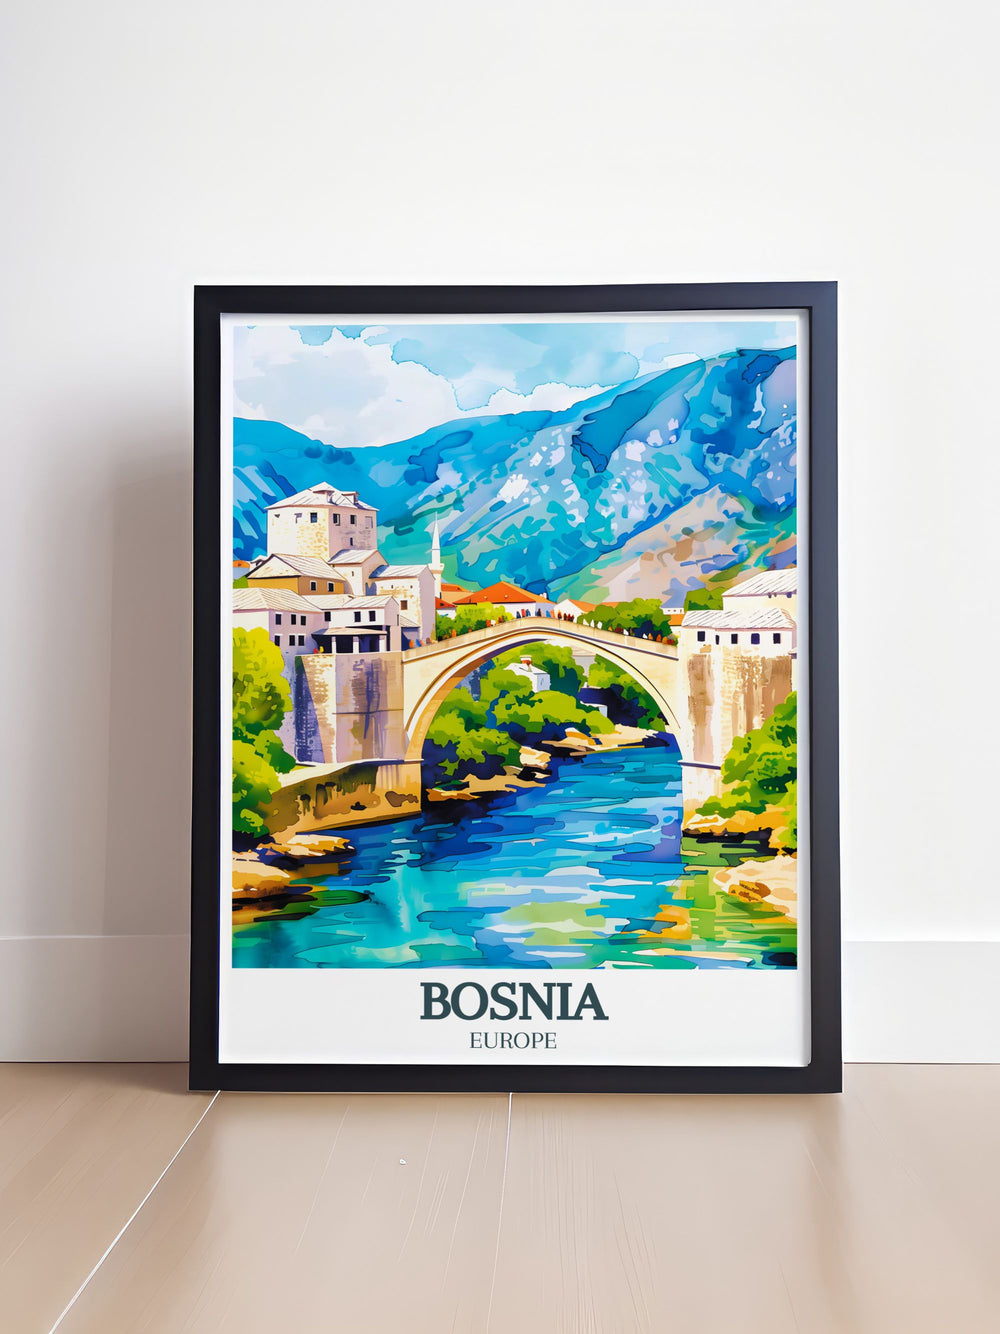 This stunning Bosnia Print features Mostar, Stari Most bridge, a symbol of resilience and unity. Ideal for home decor, this Bosnia Art Print brings the historic charm of Mostar to any living space. Available as a Digital Download for convenience.